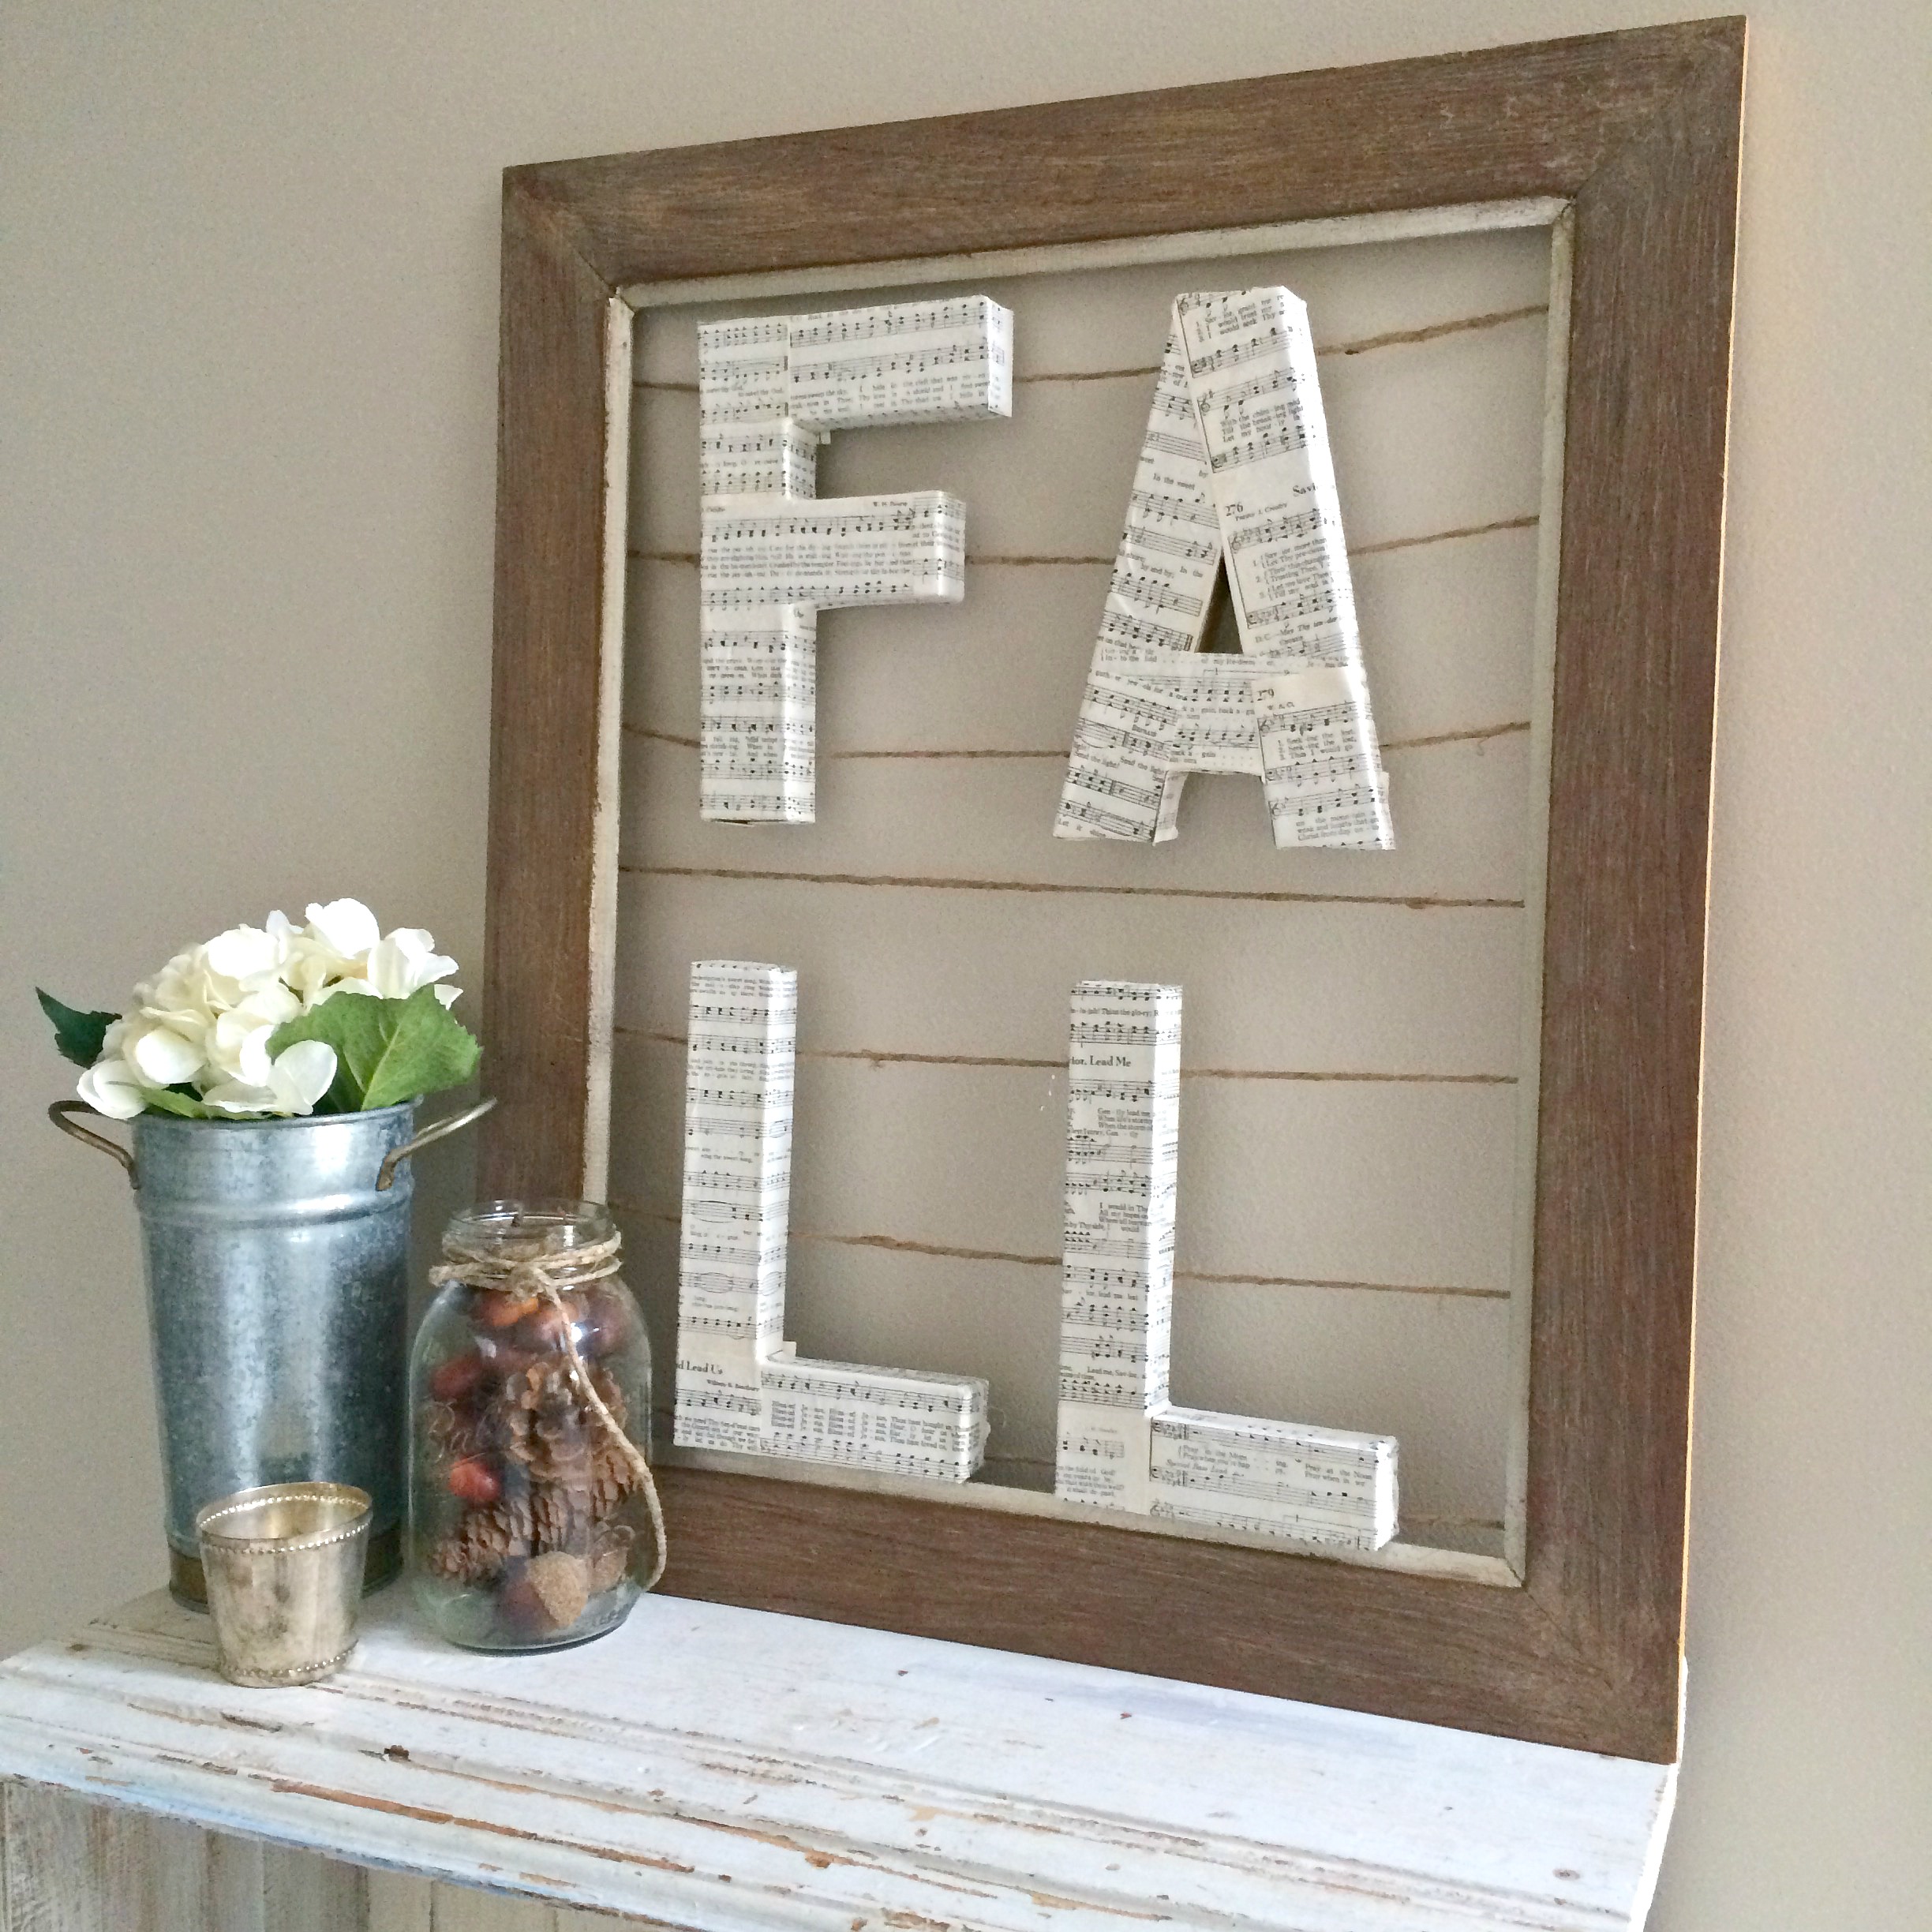 This neutral fall sign is a unique project to add some cozy charm to your fall decor! And so easy too!